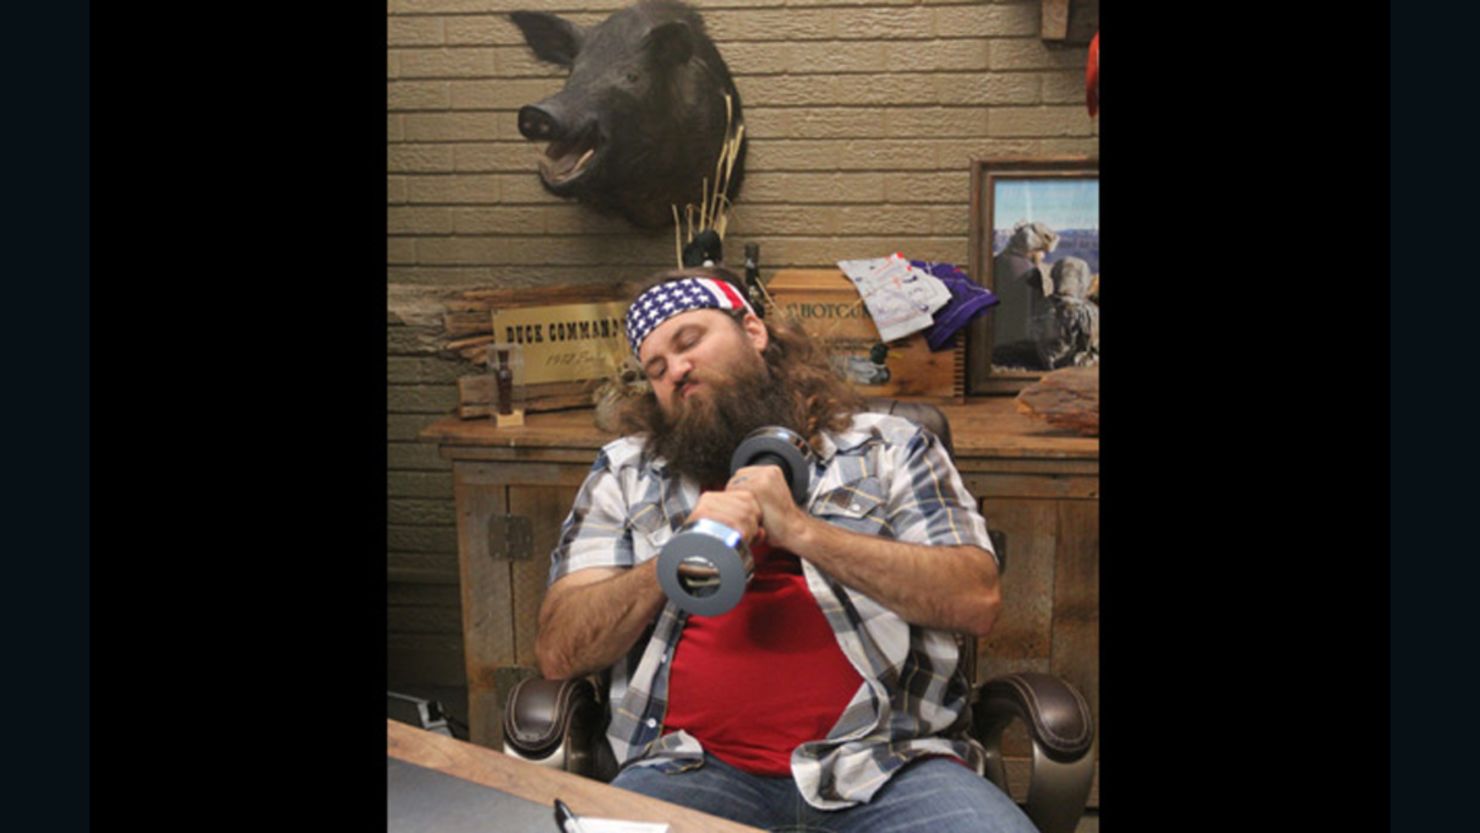 A scene from "Duck Dynasty."